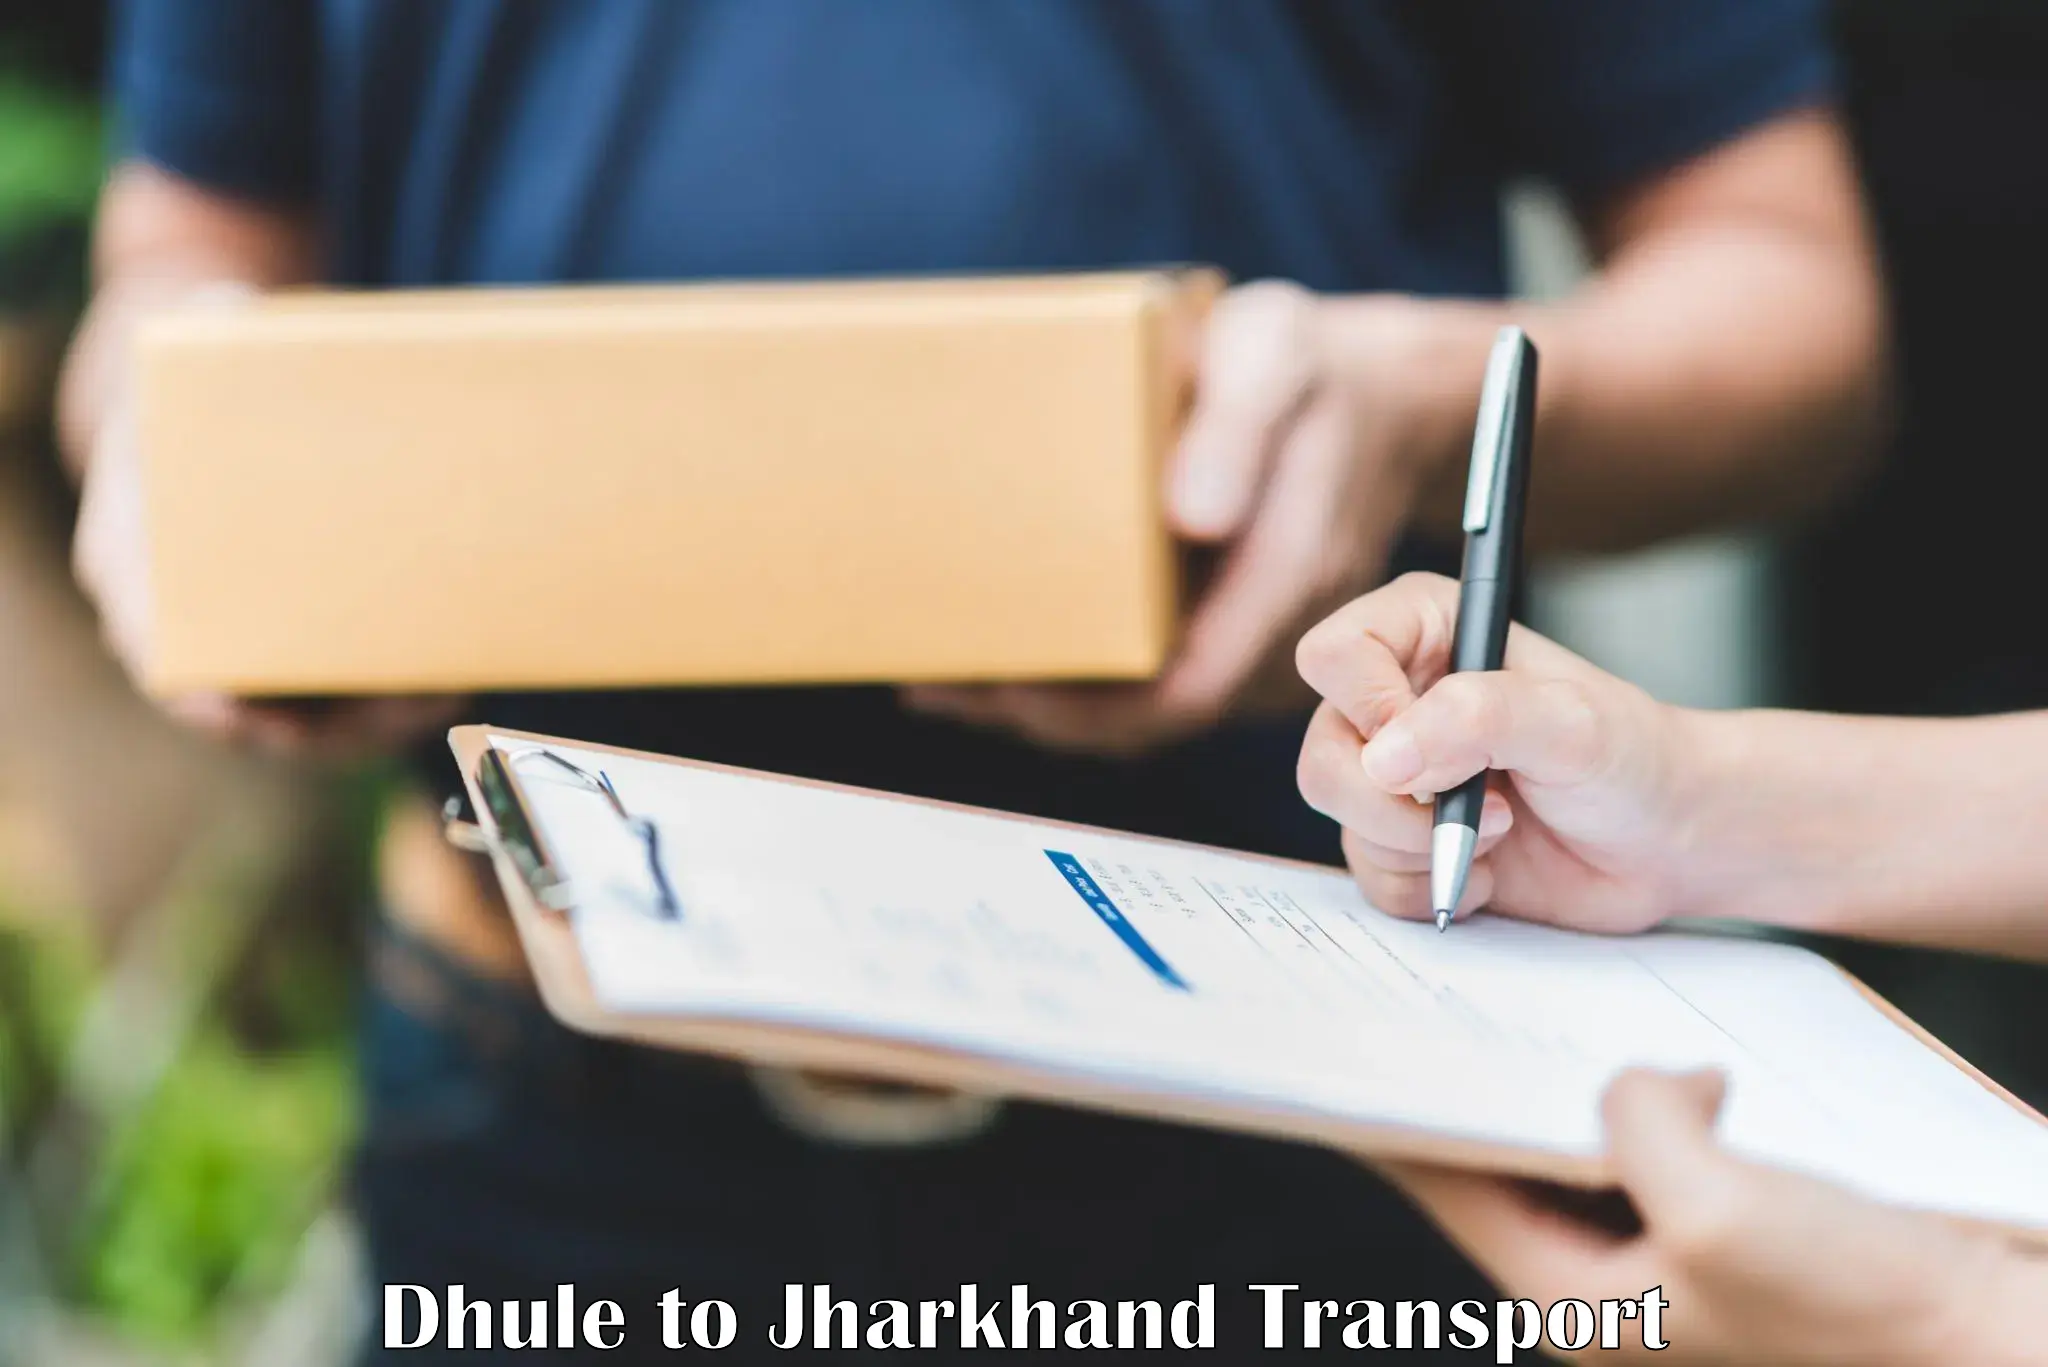 Furniture transport service Dhule to Birla Institute of Technology Ranchi